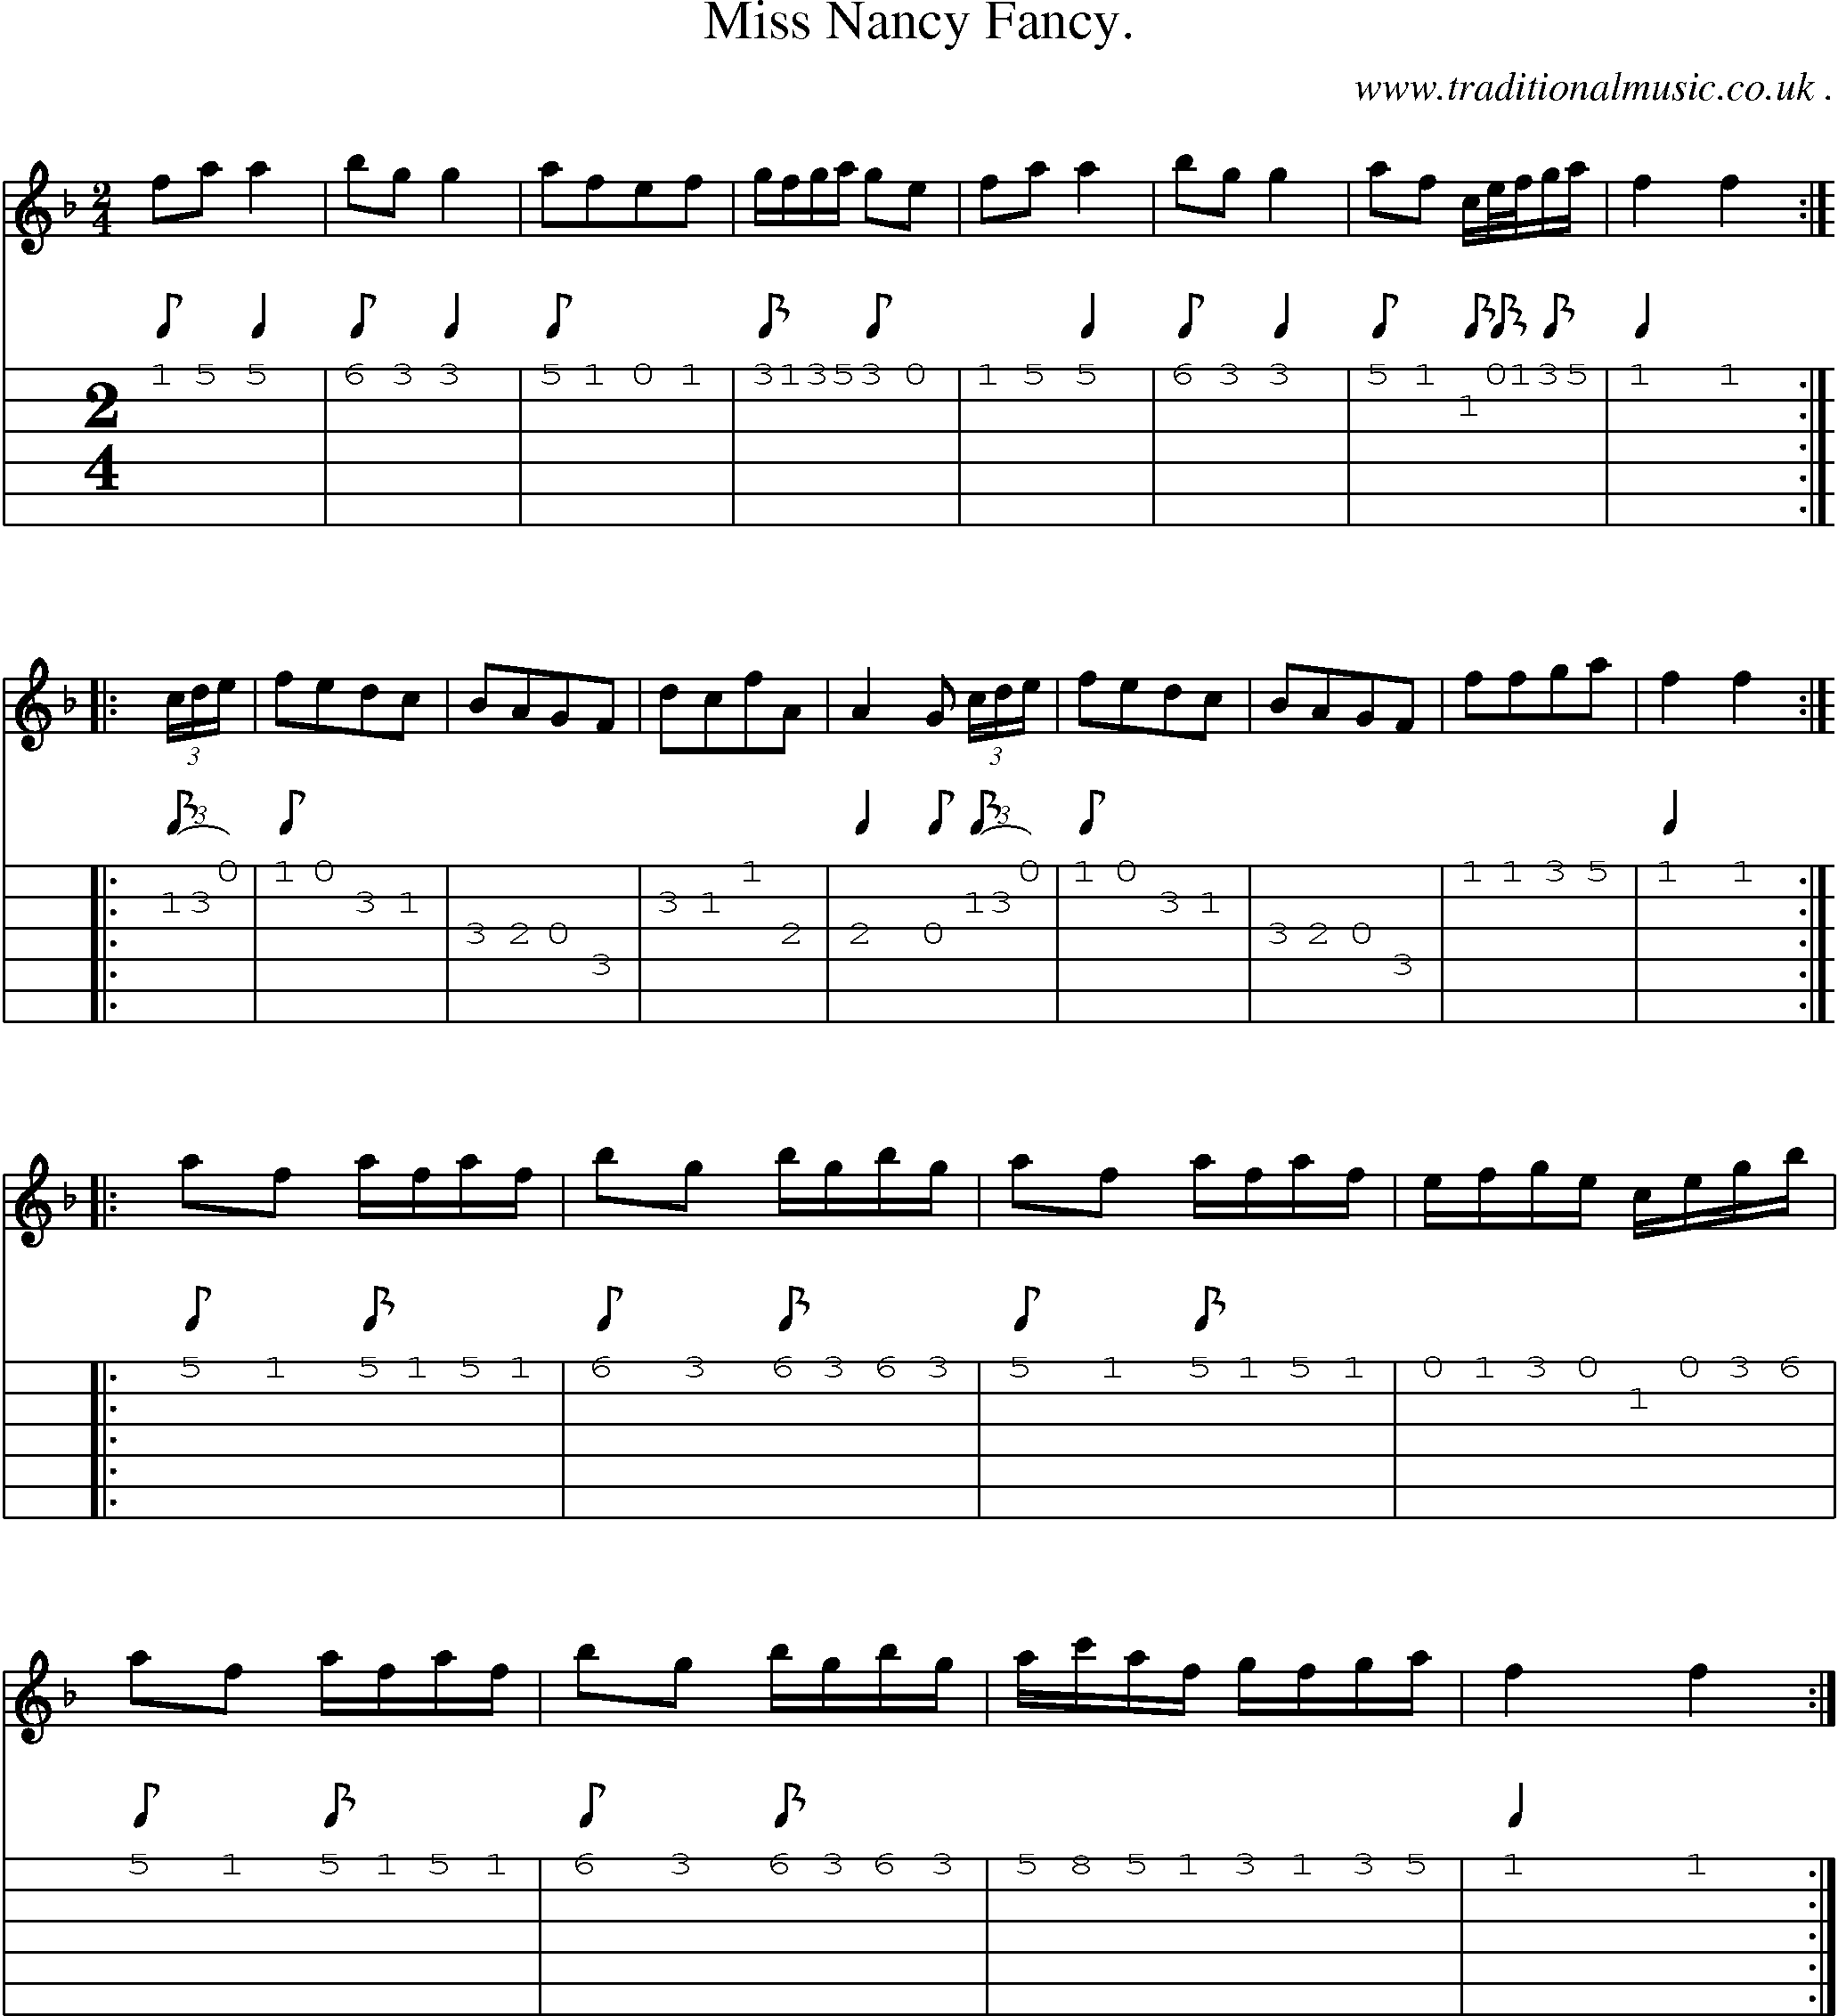 Sheet-Music and Guitar Tabs for Miss Nancy Fancy